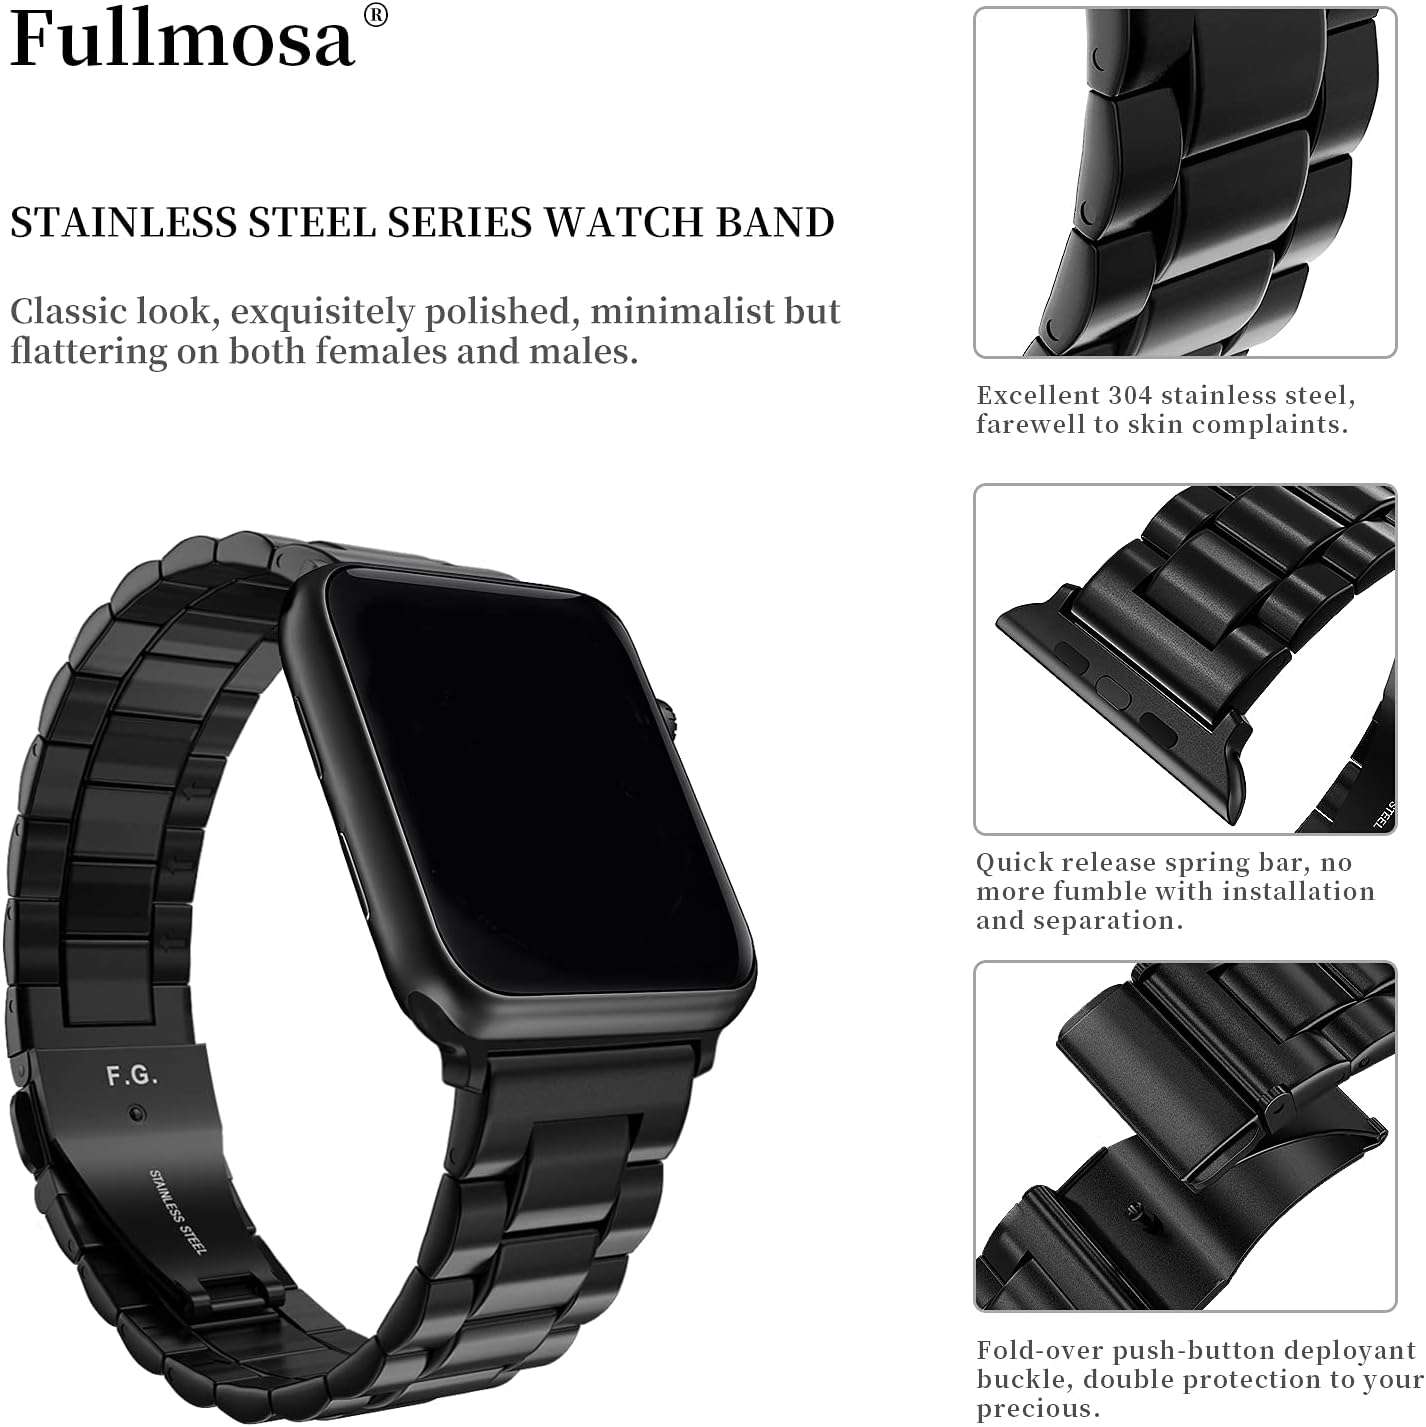 autopostr_pinterest_64088, Fullmosa Apple Watch, Stainless Steel Bracelet, Watch Strap Upgrade - available at Sparq Mart